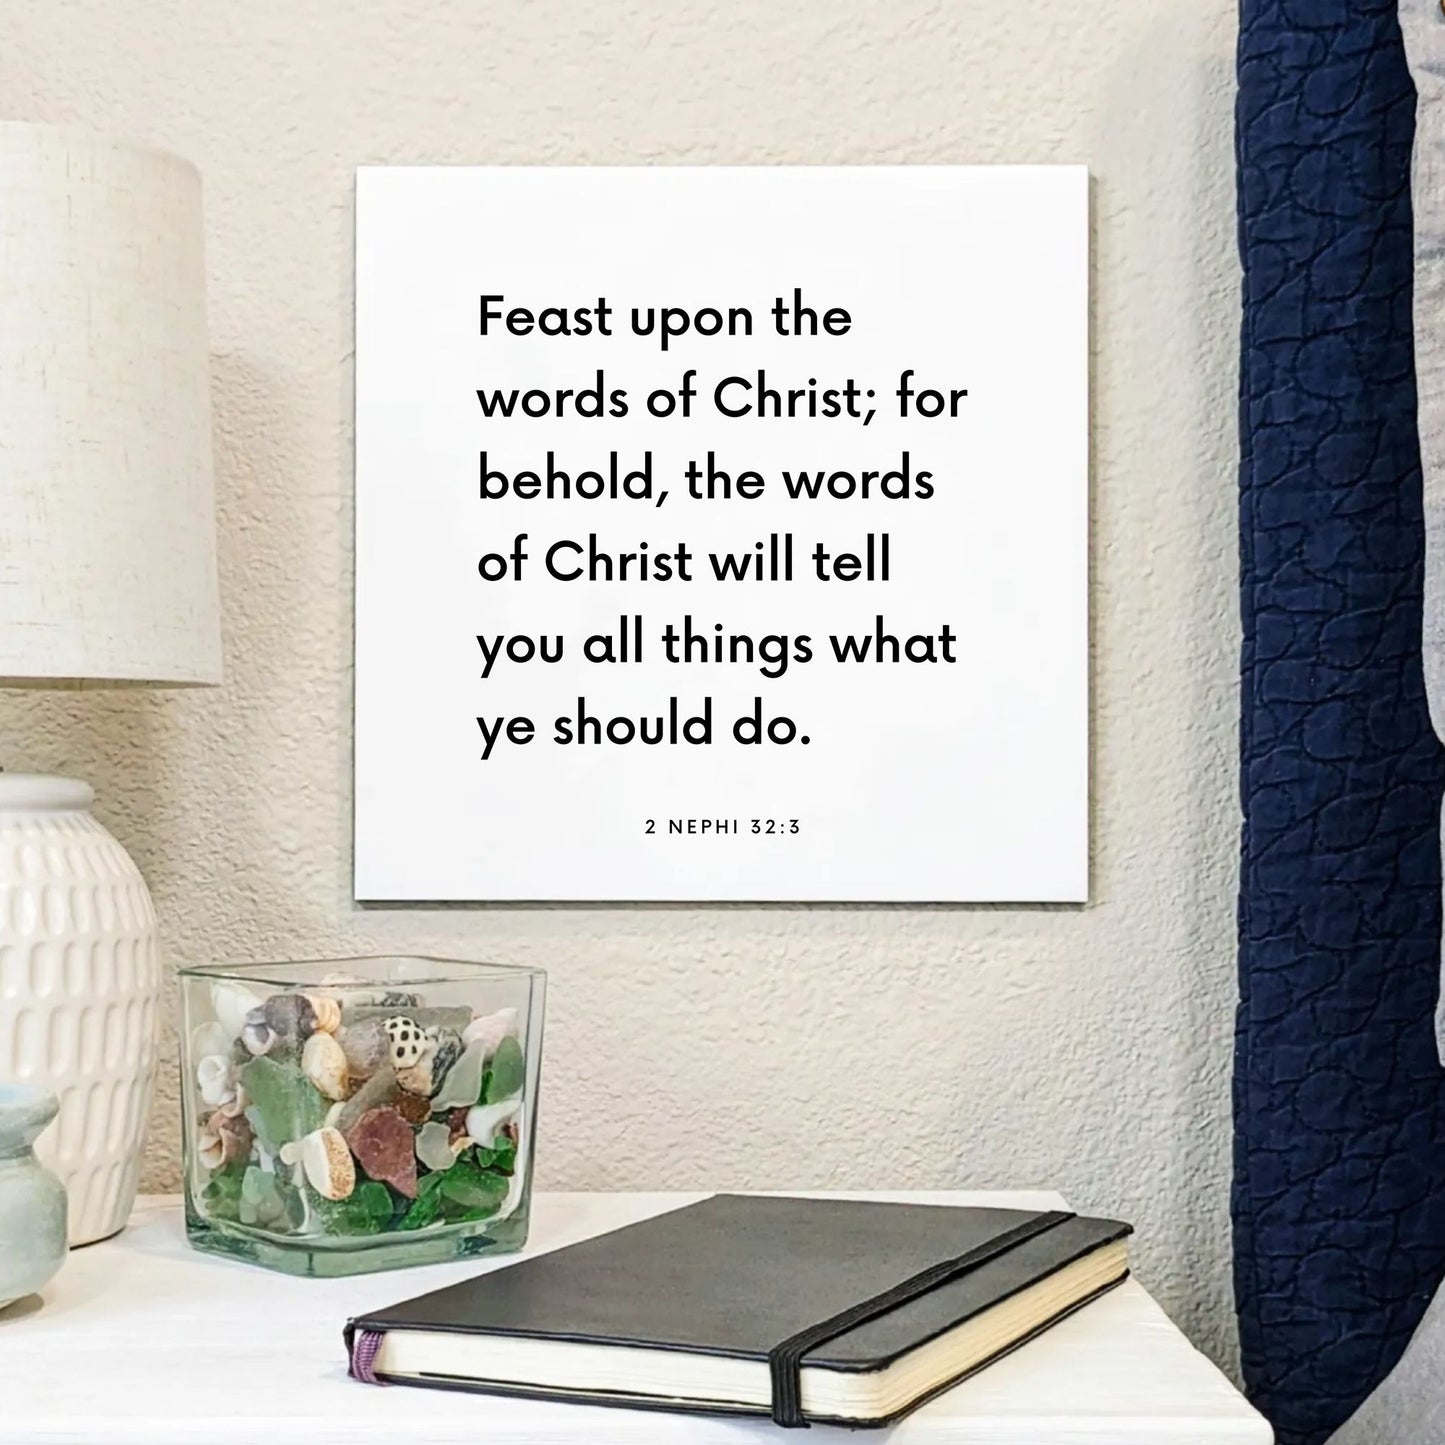 Bedside mouting of the scripture tile for 2 Nephi 32:3 - "Feast upon the words of Christ"